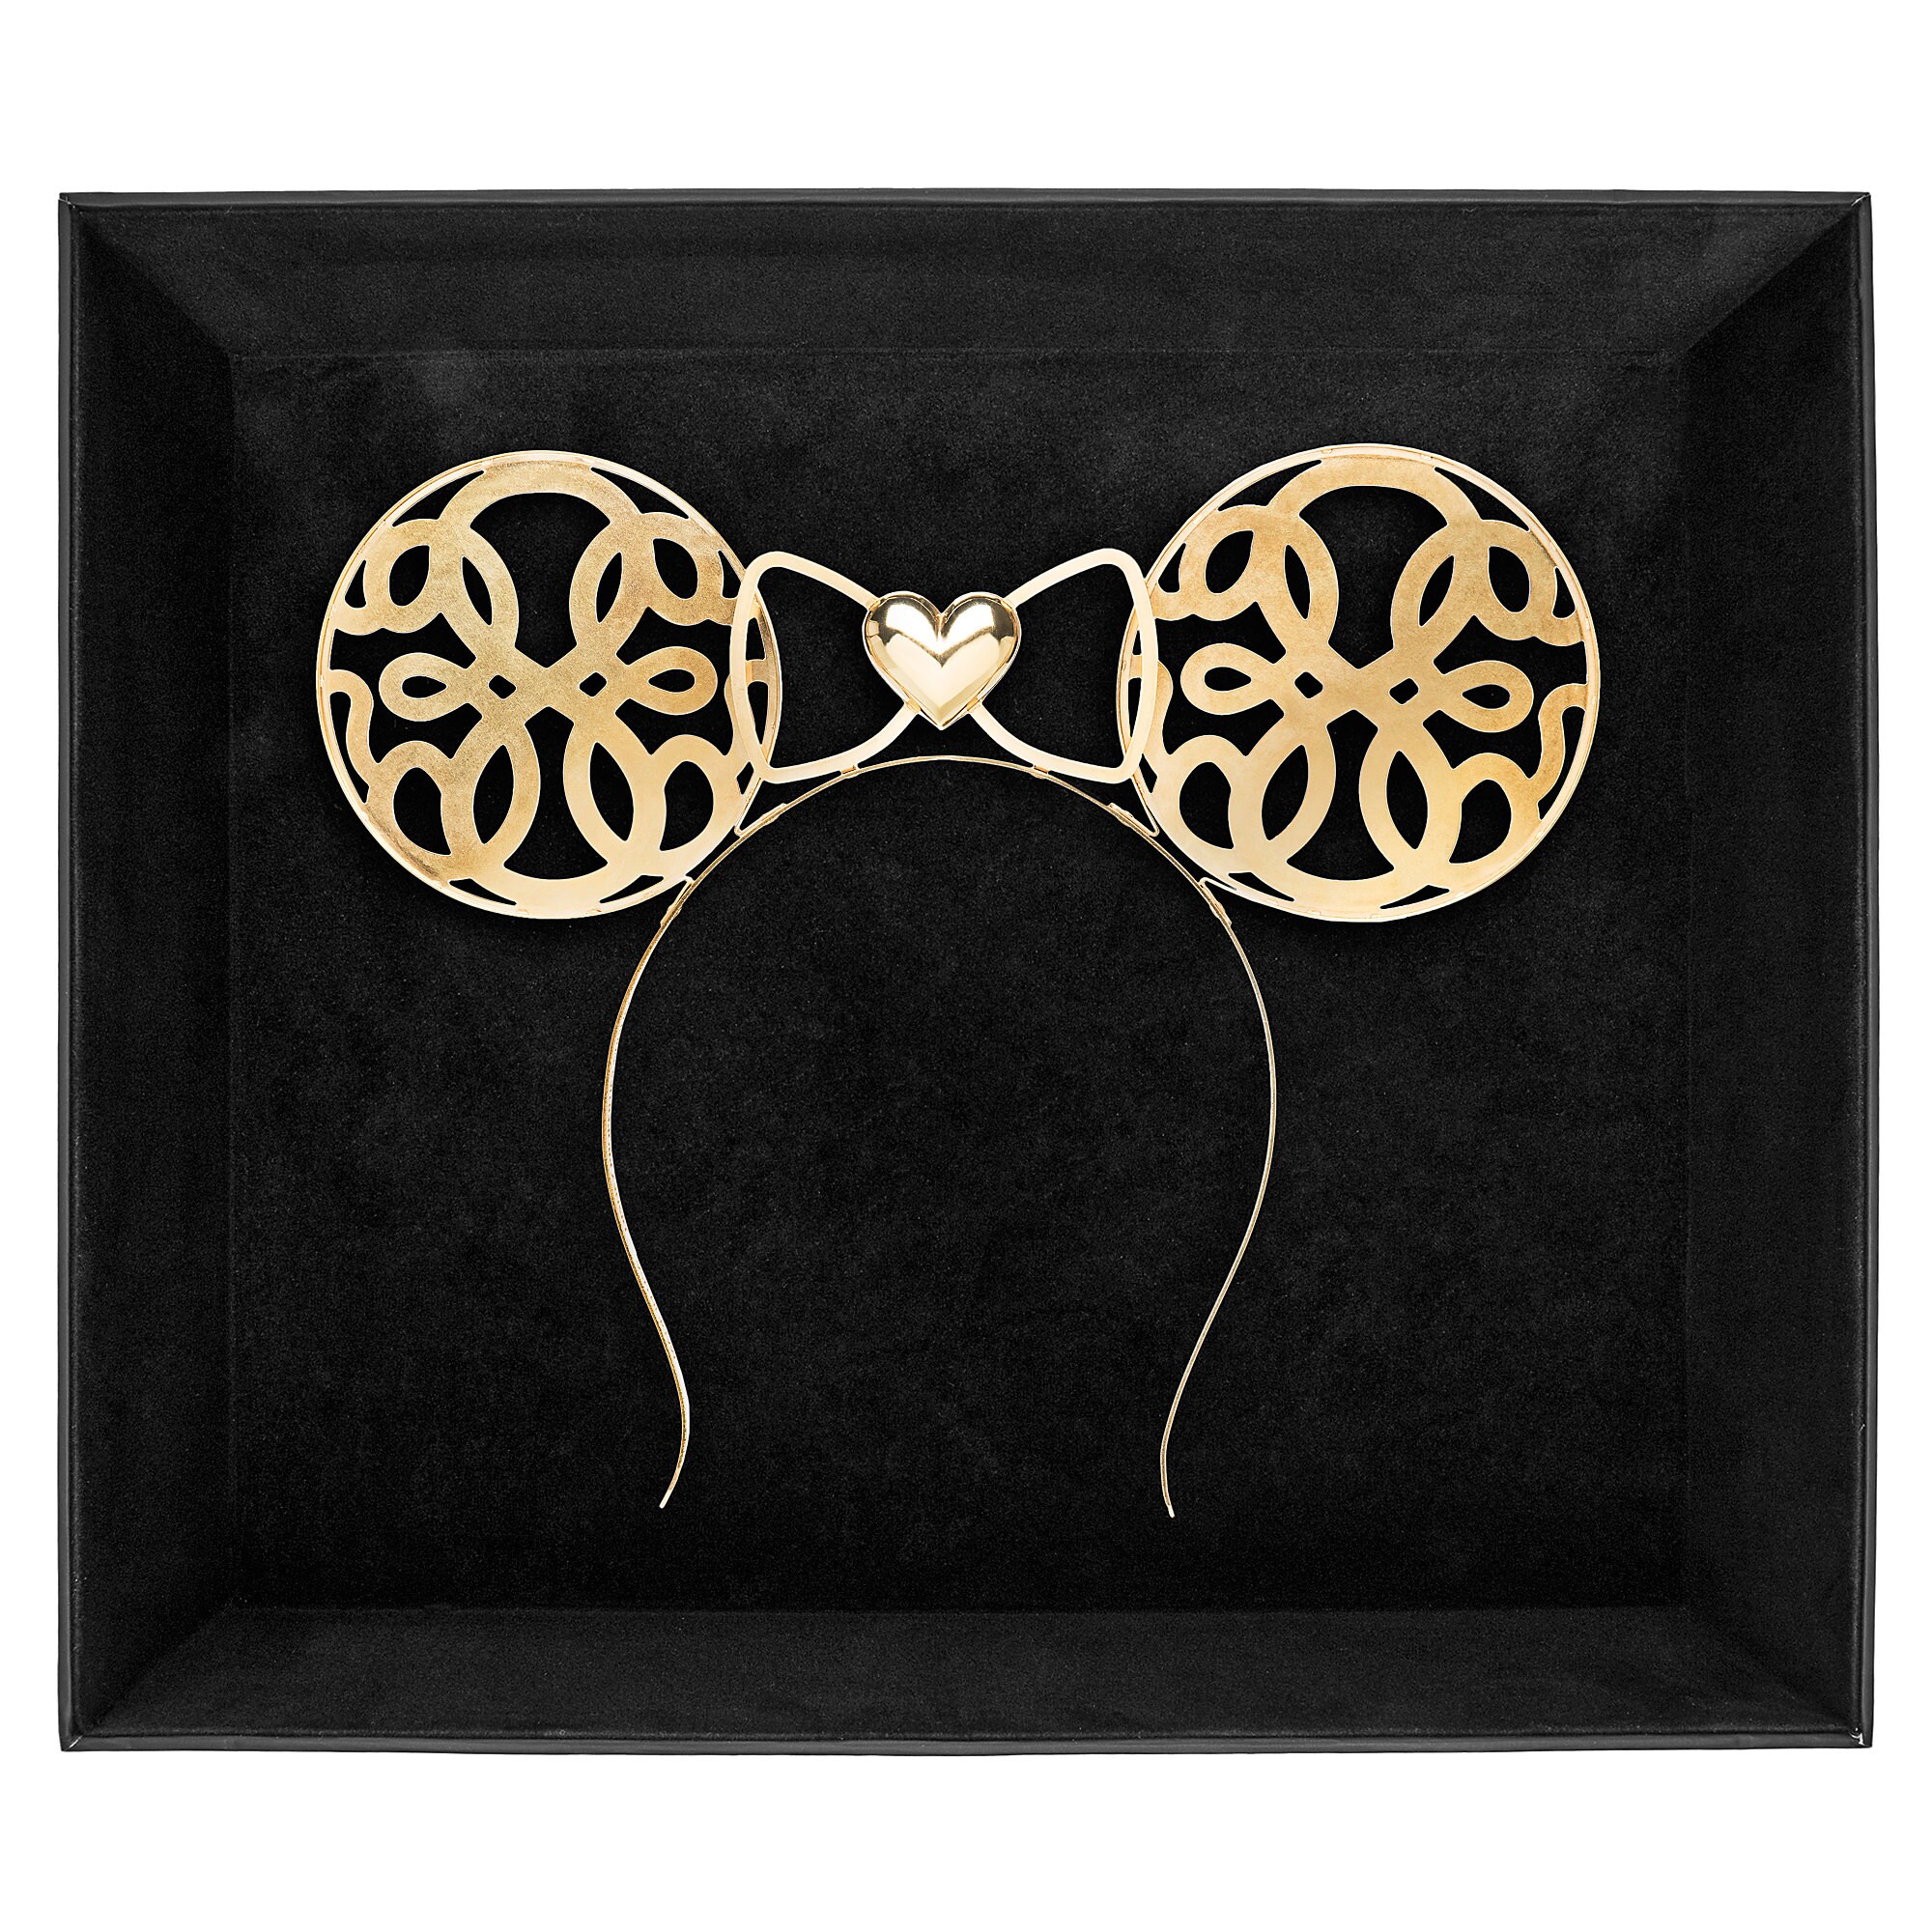 Minnie Mouse Metal Ear Headband by Alex and Ani - Limited Release